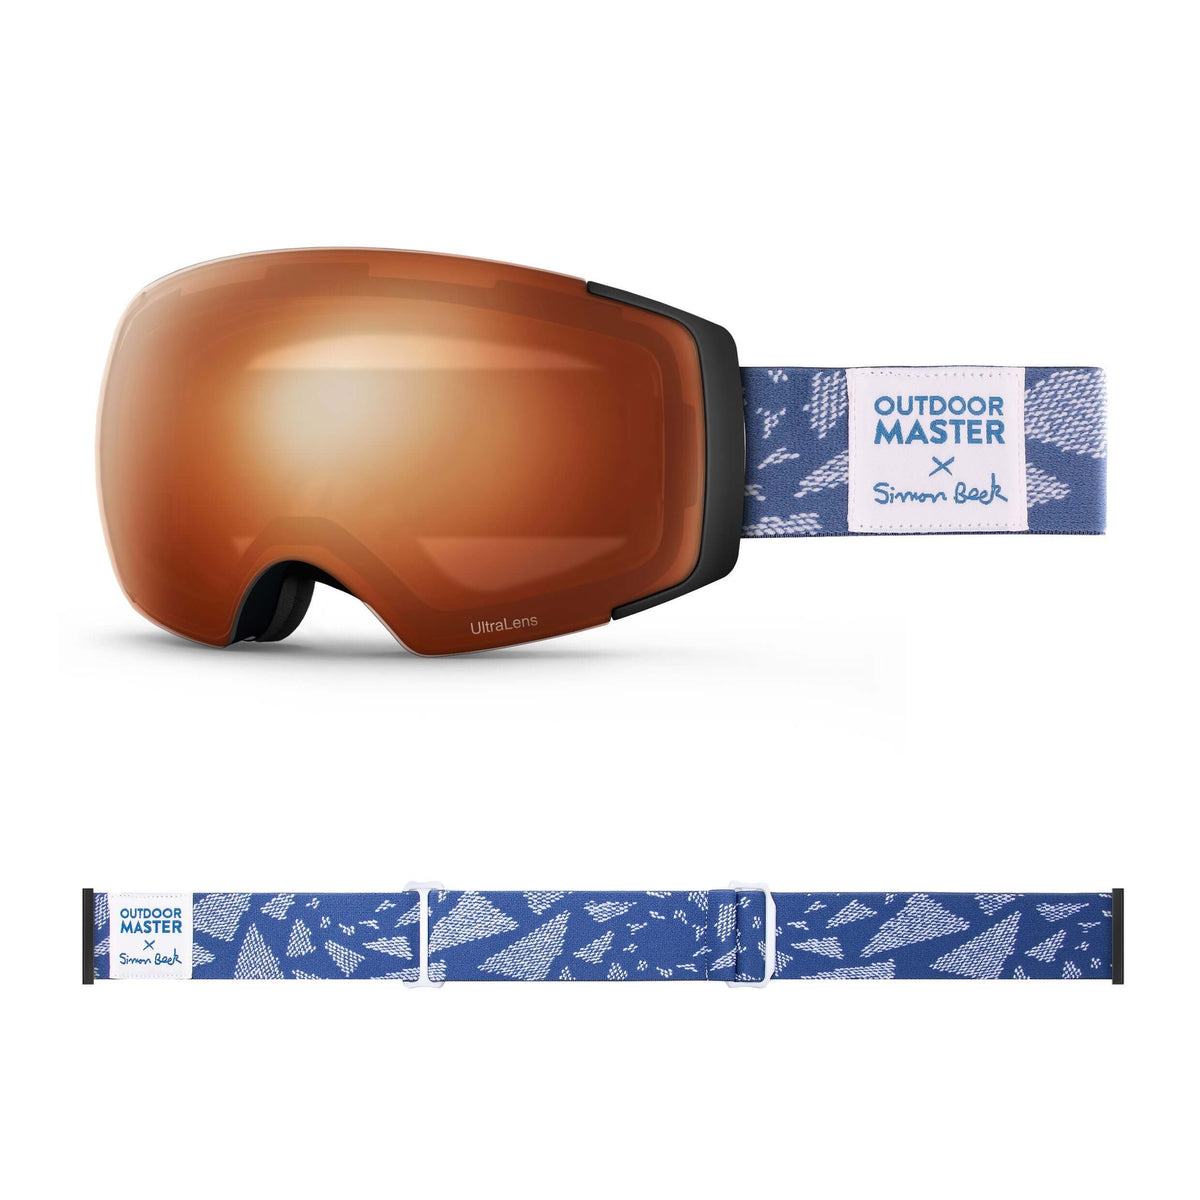 OutdoorMaster x Simon Beck Ski Goggles Pro Series - Snowshoeing Art Limited Edition OutdoorMaster UltraLens VLT 29% Optimized Orange Flying Triangles